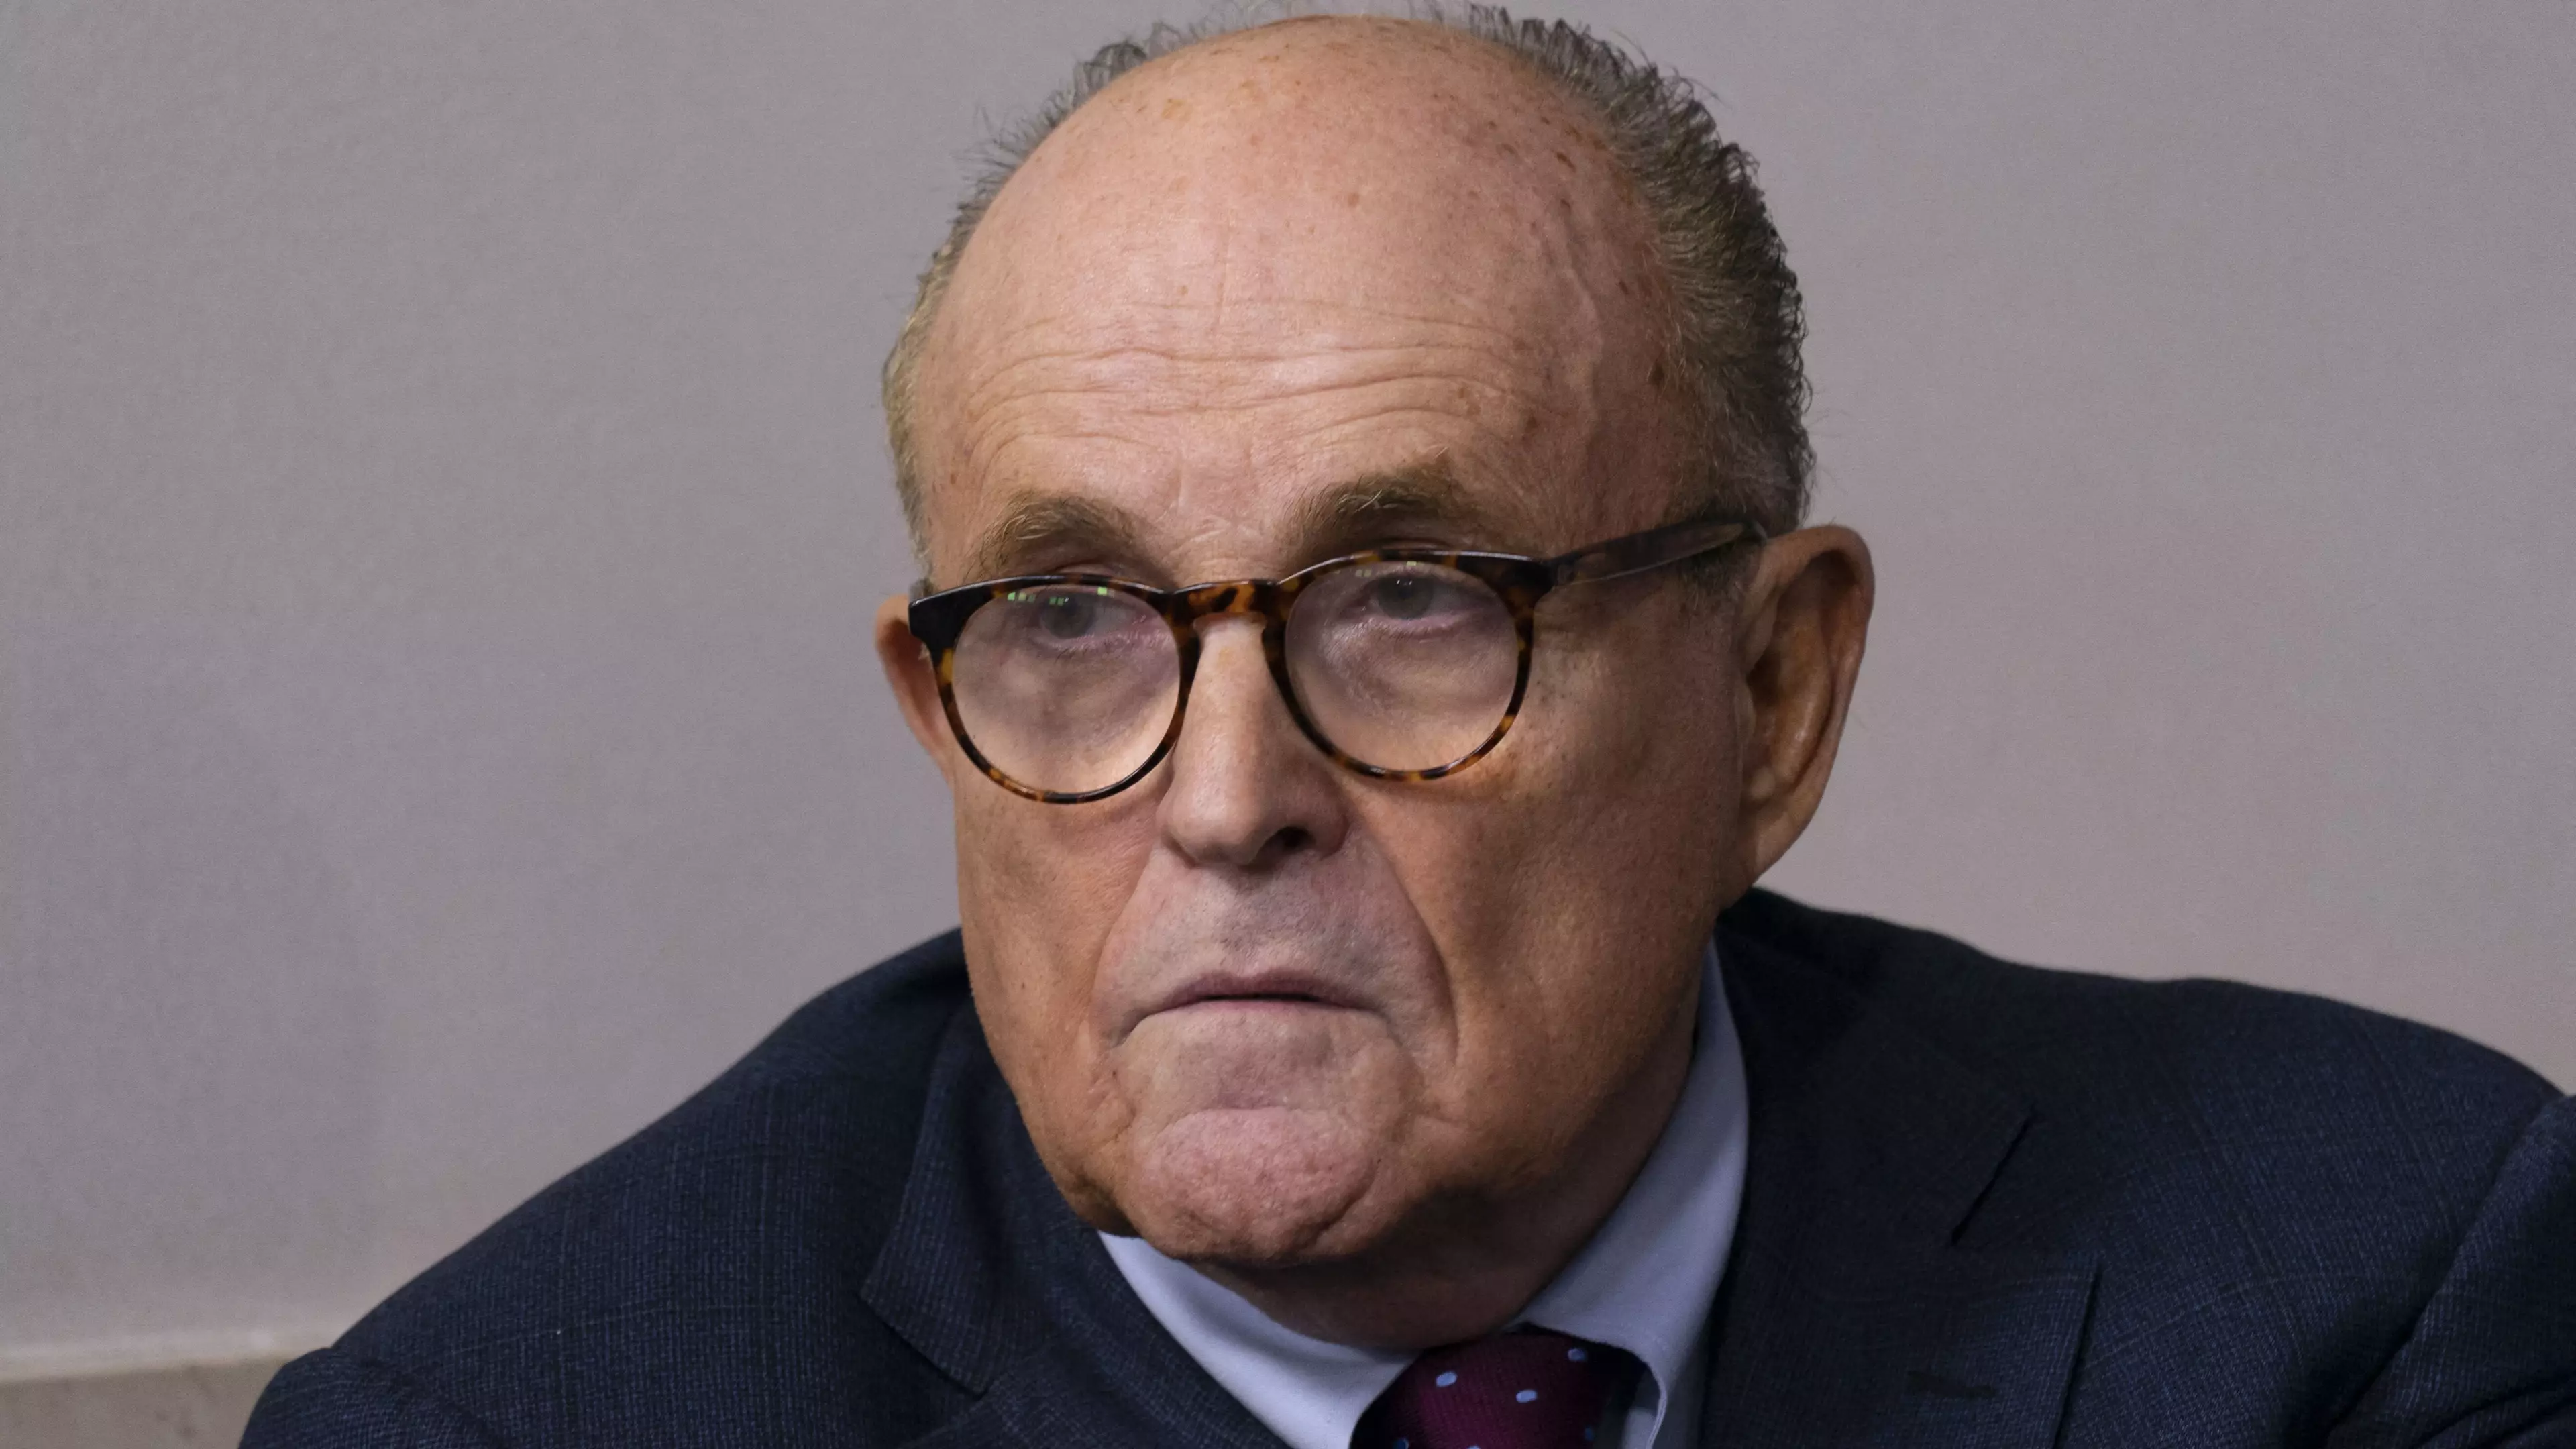 Rudy Giuliani Responds After Being Sued For $1.3 Billion Over Election Fraud Claims